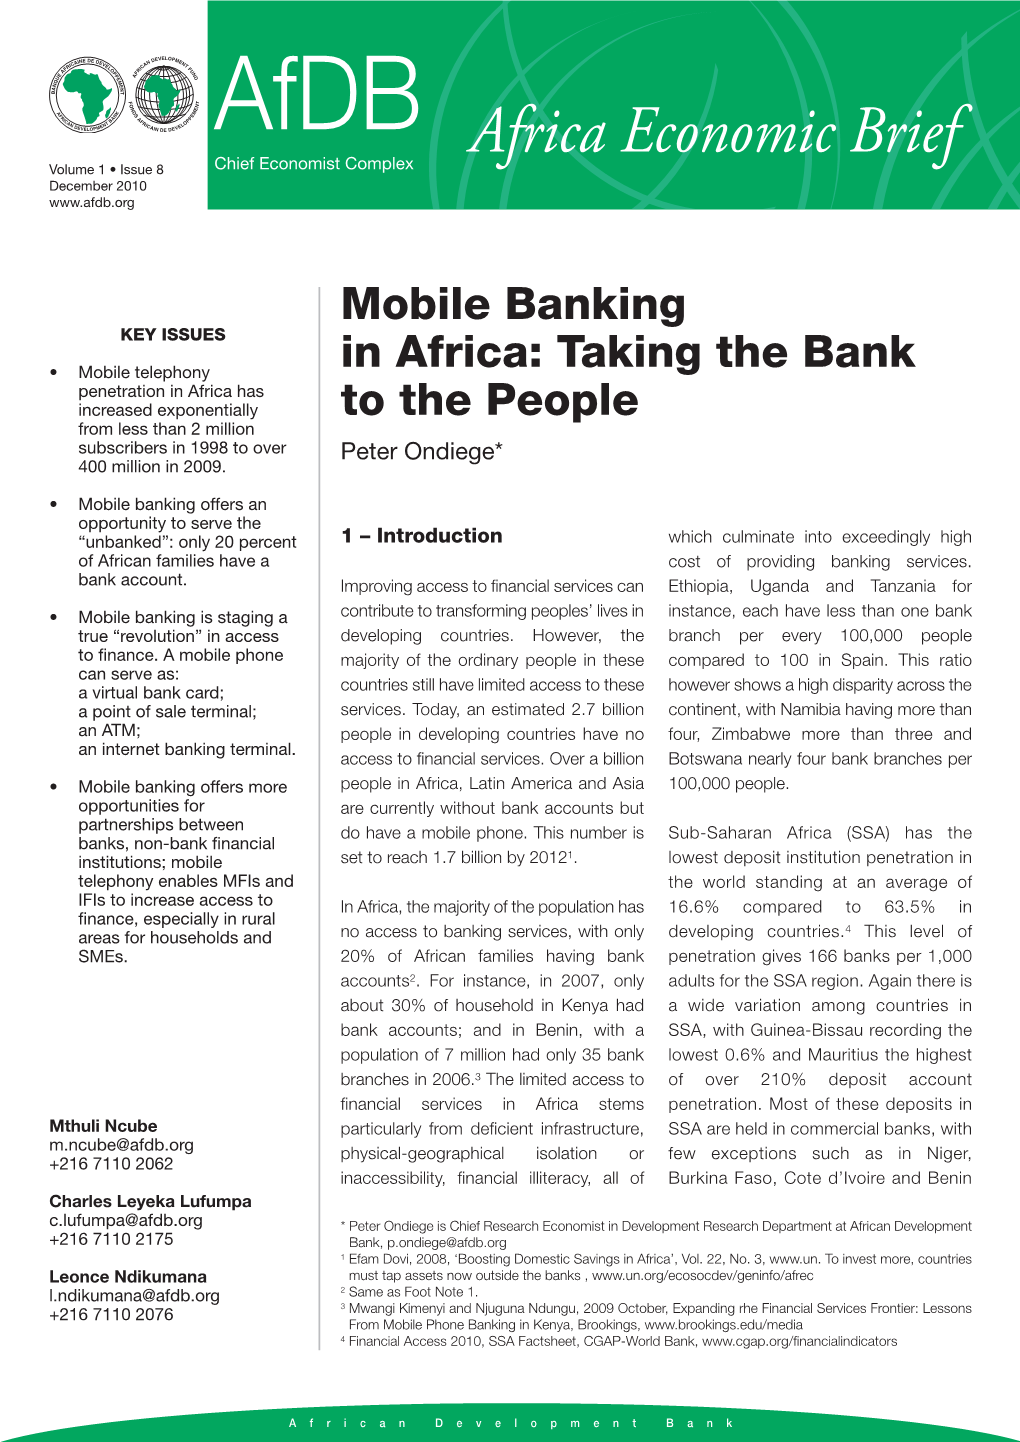 Mobile Banking in Africa